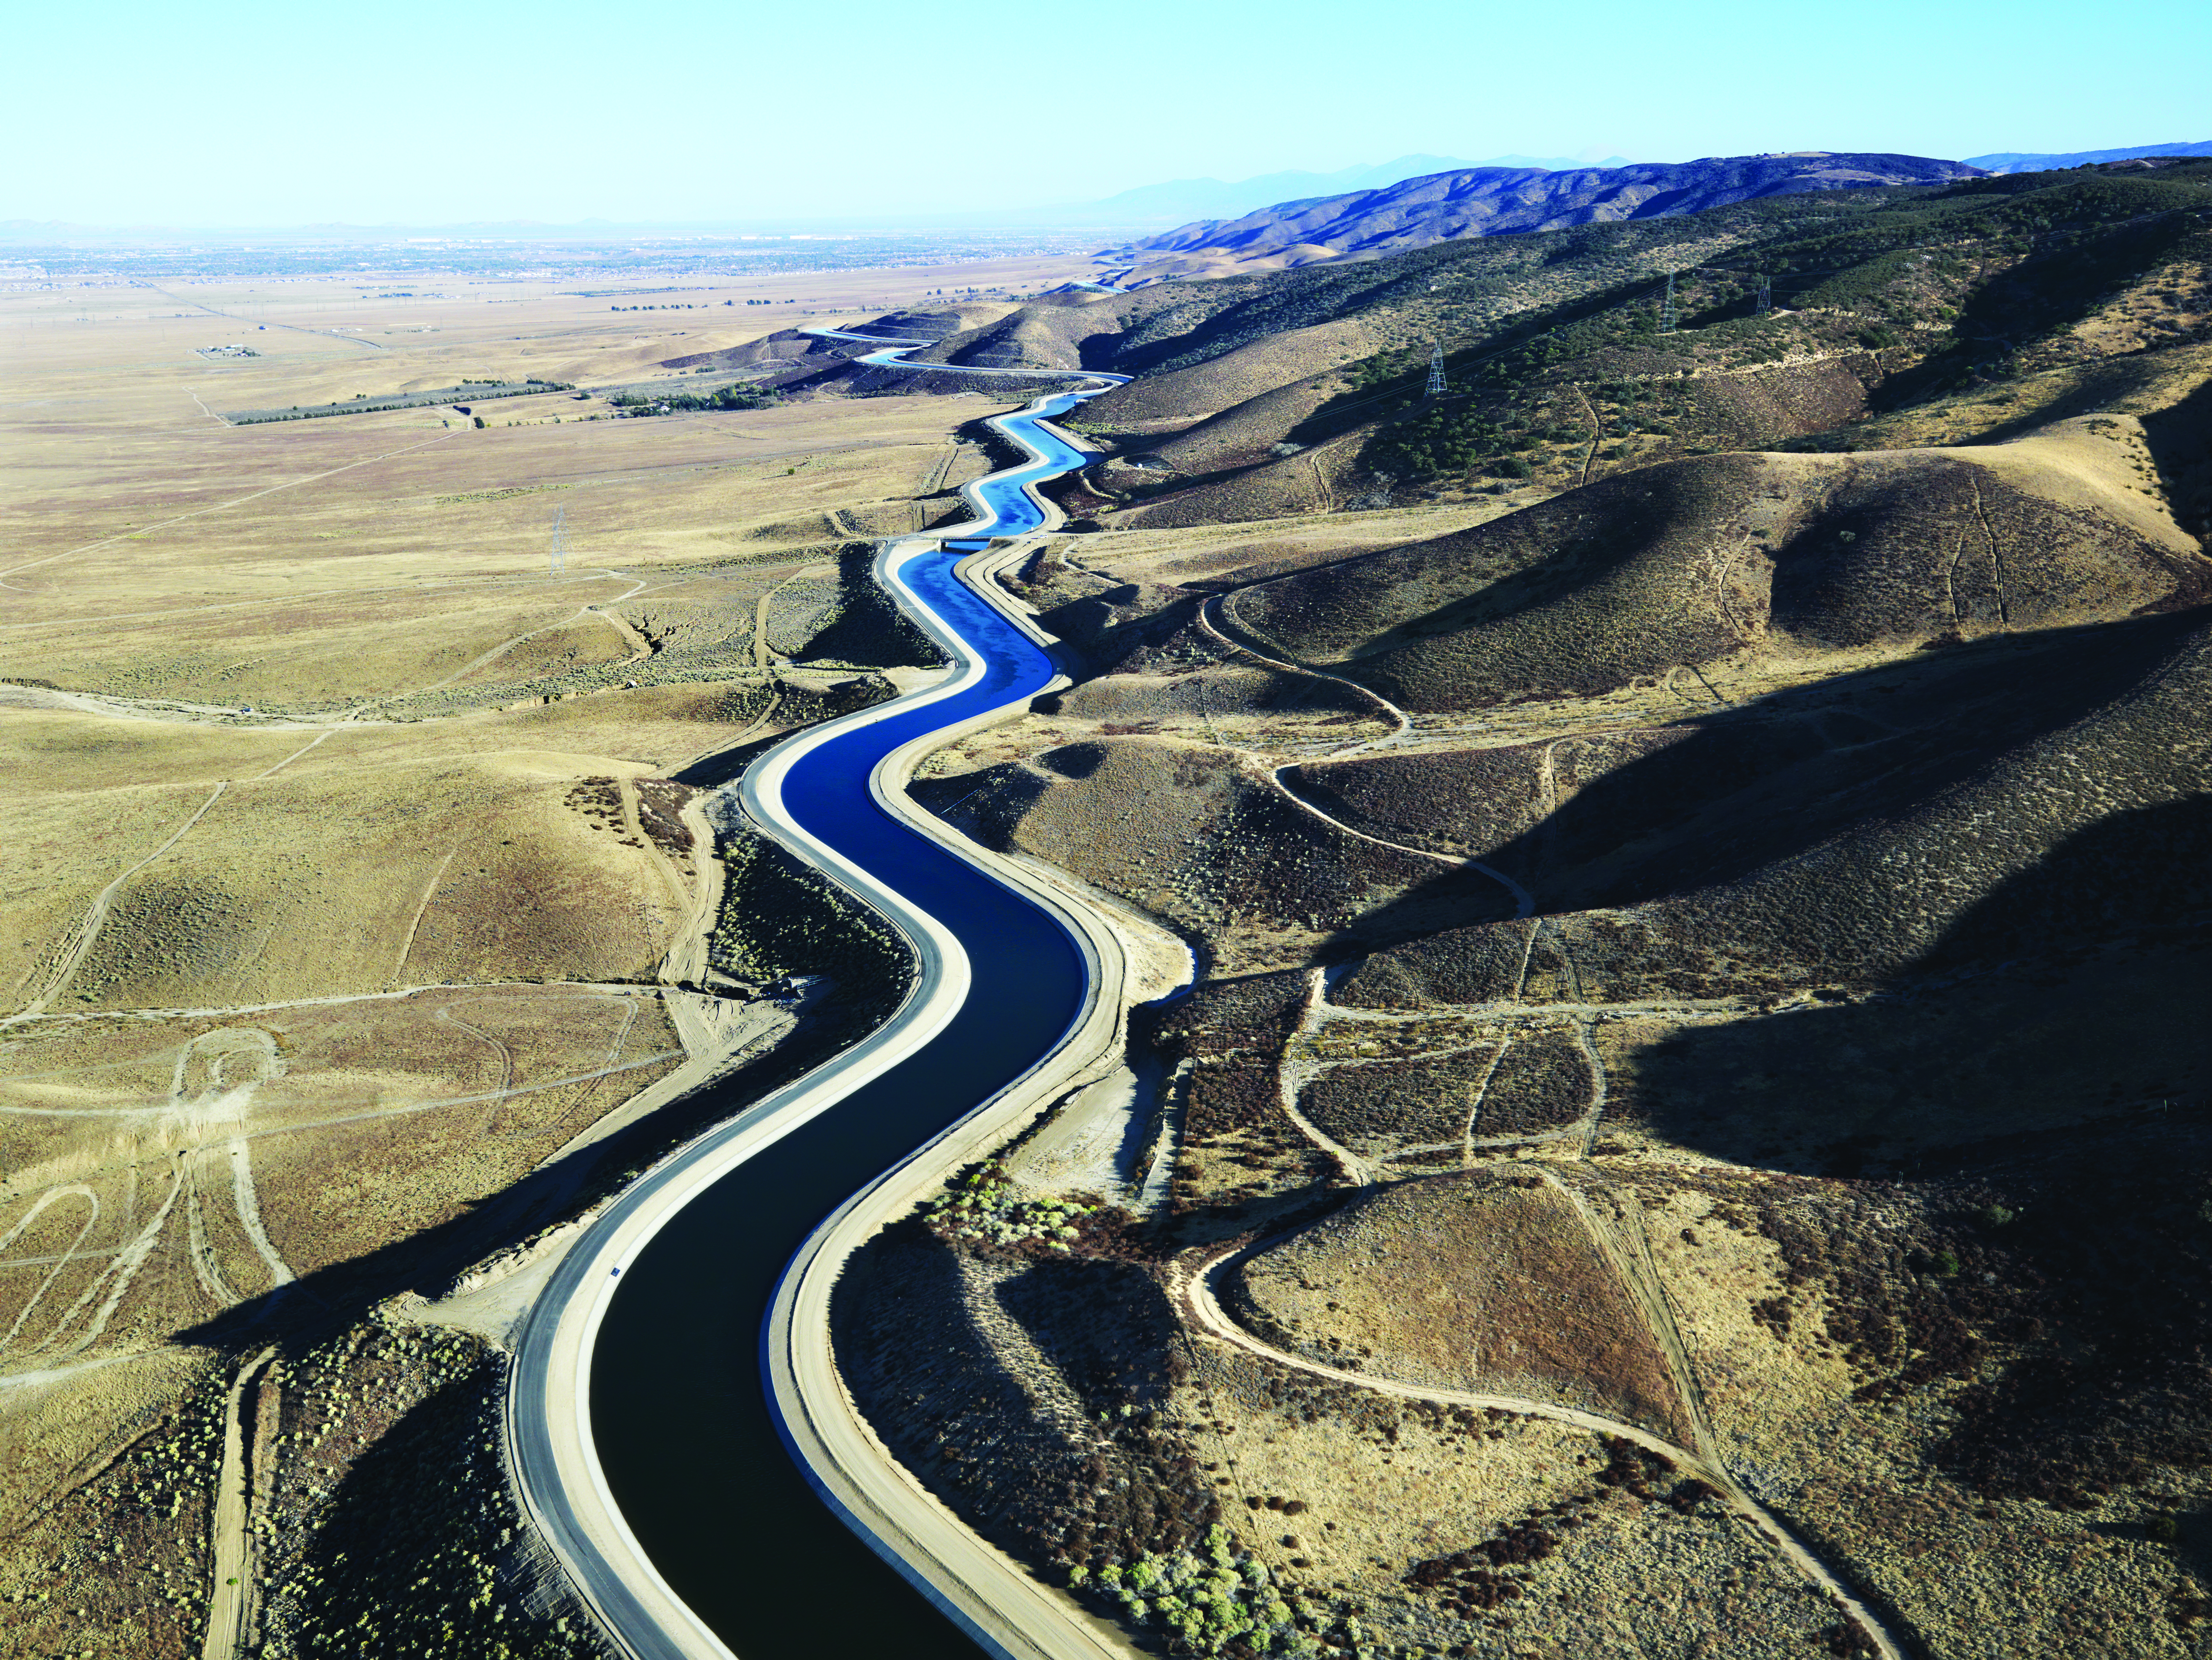 California State Water Project canal